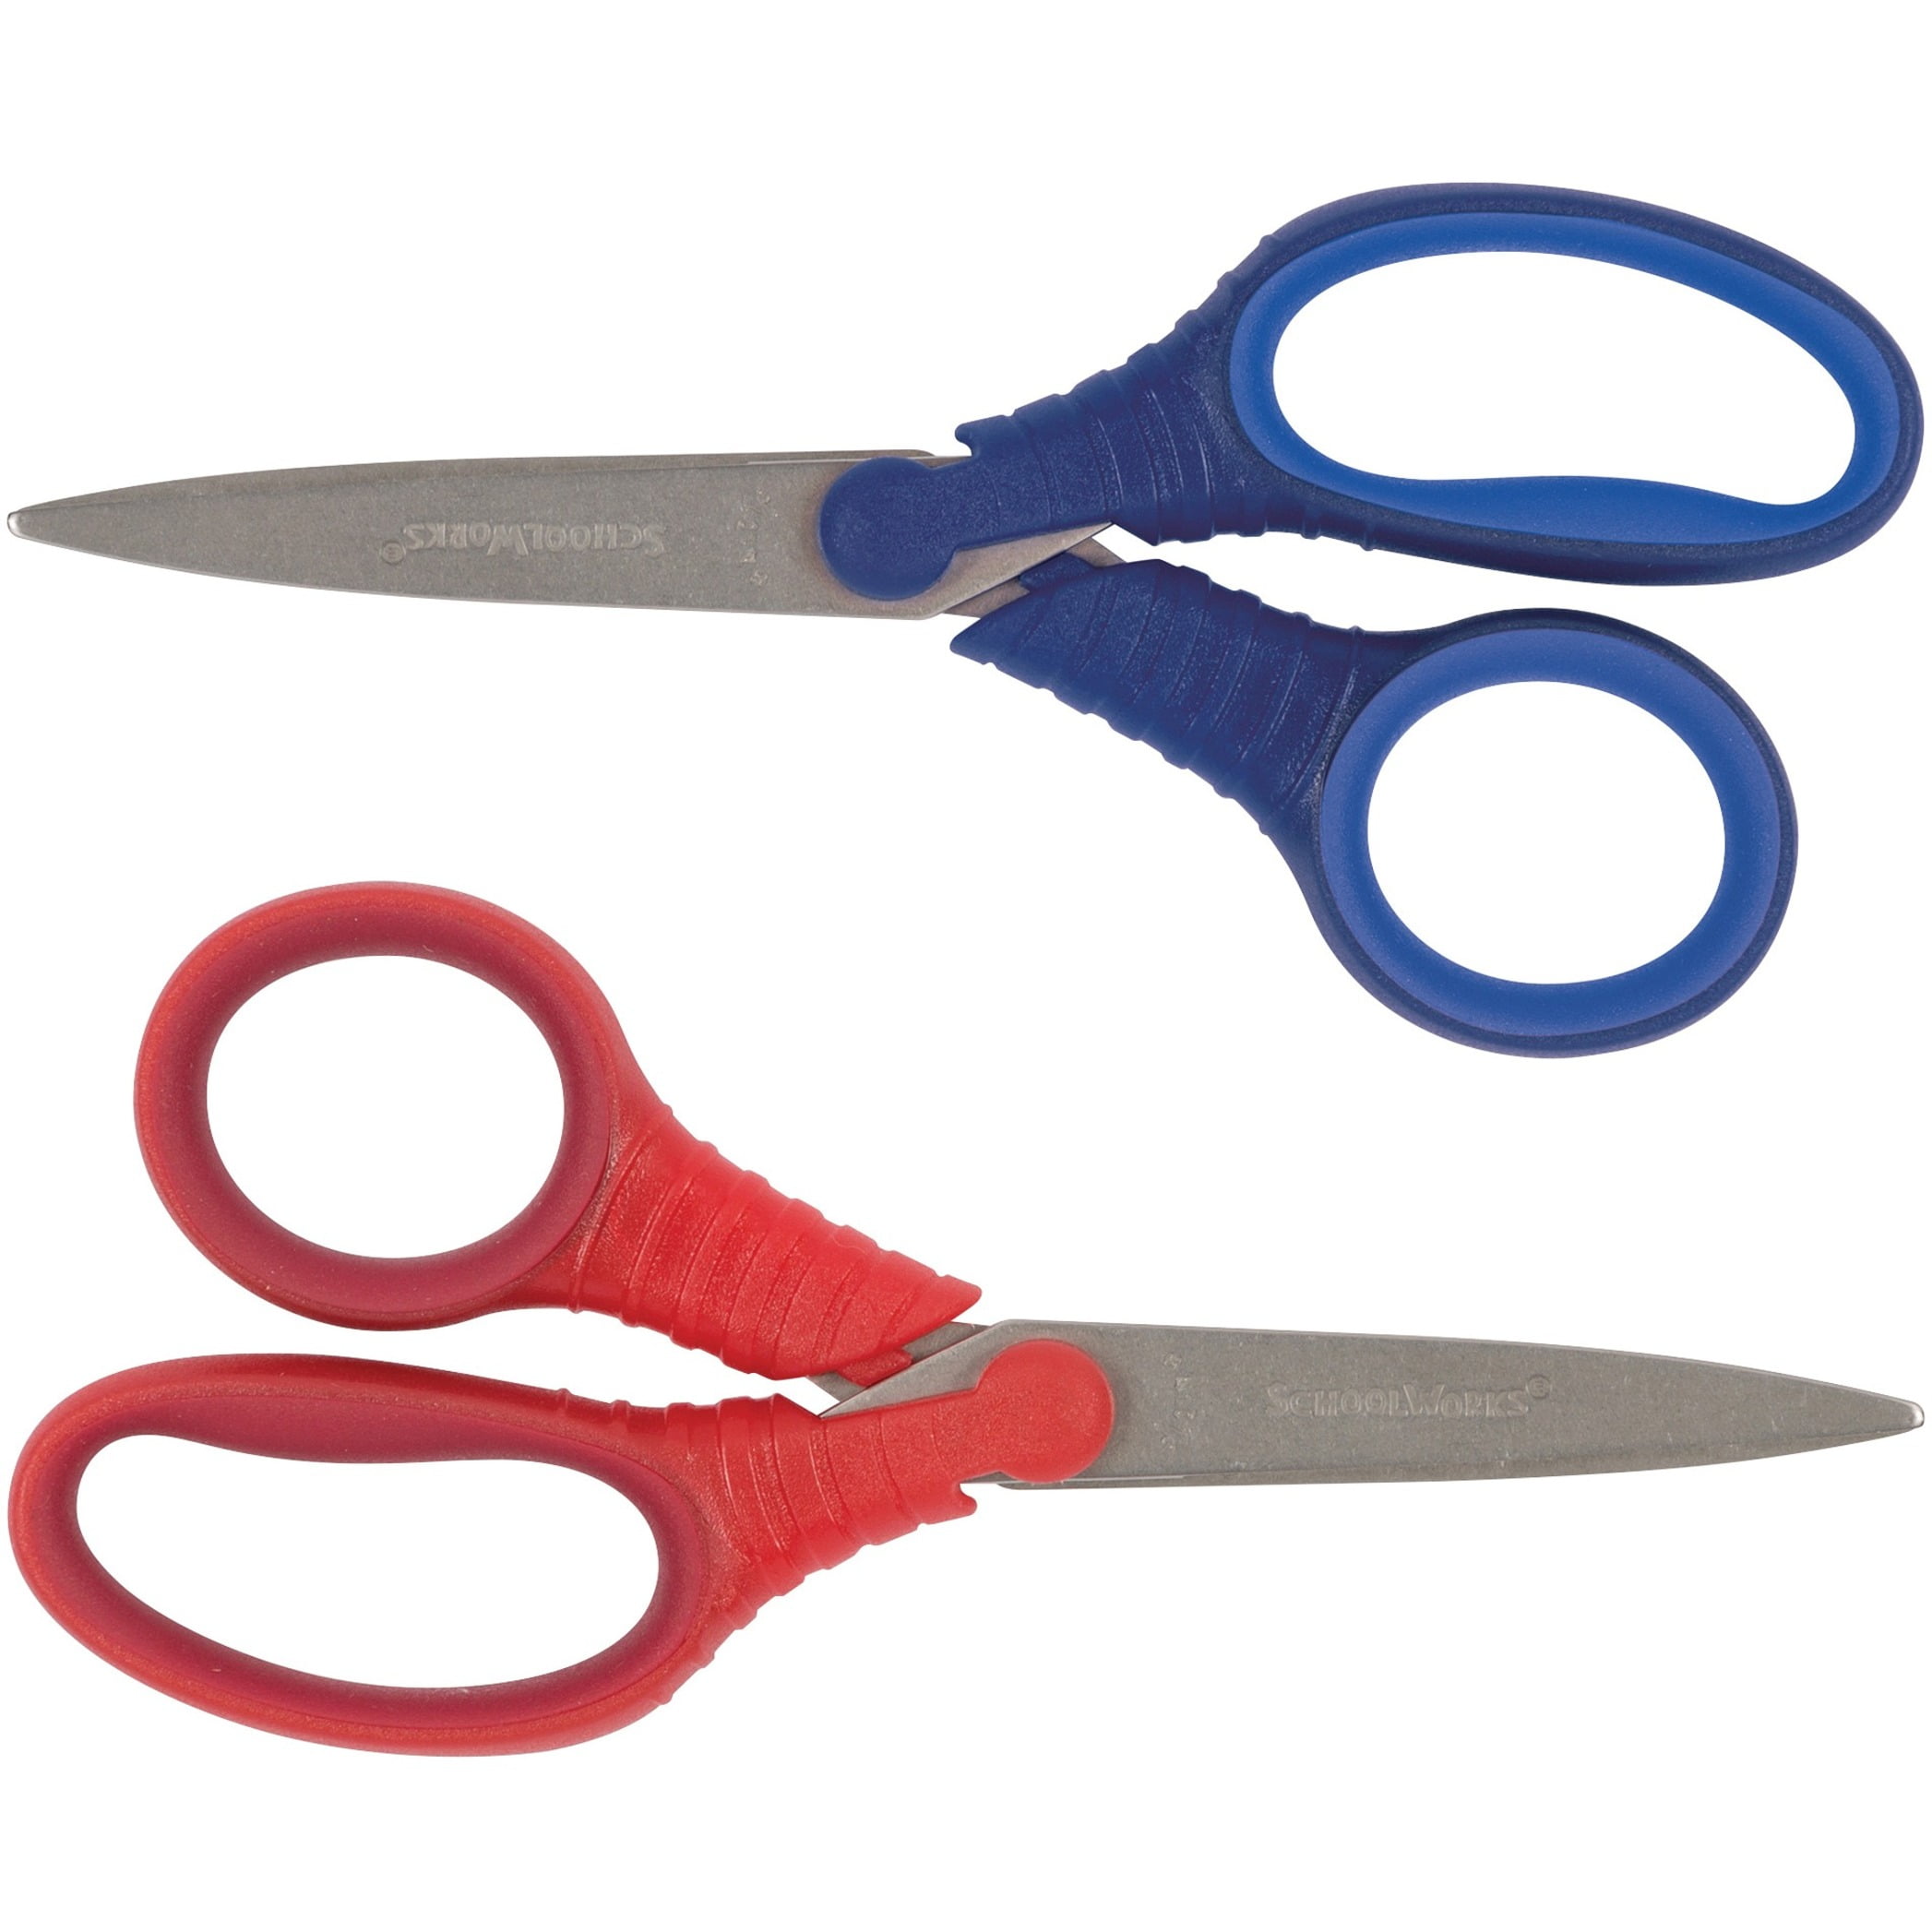 Kids Scissors,5.5′ Blunt tip Scissors for child,scissors for school  kids,Safe blade suitable for cutting paper handicraft painting  school,Blue-3 packs –  – Toys and Game Store